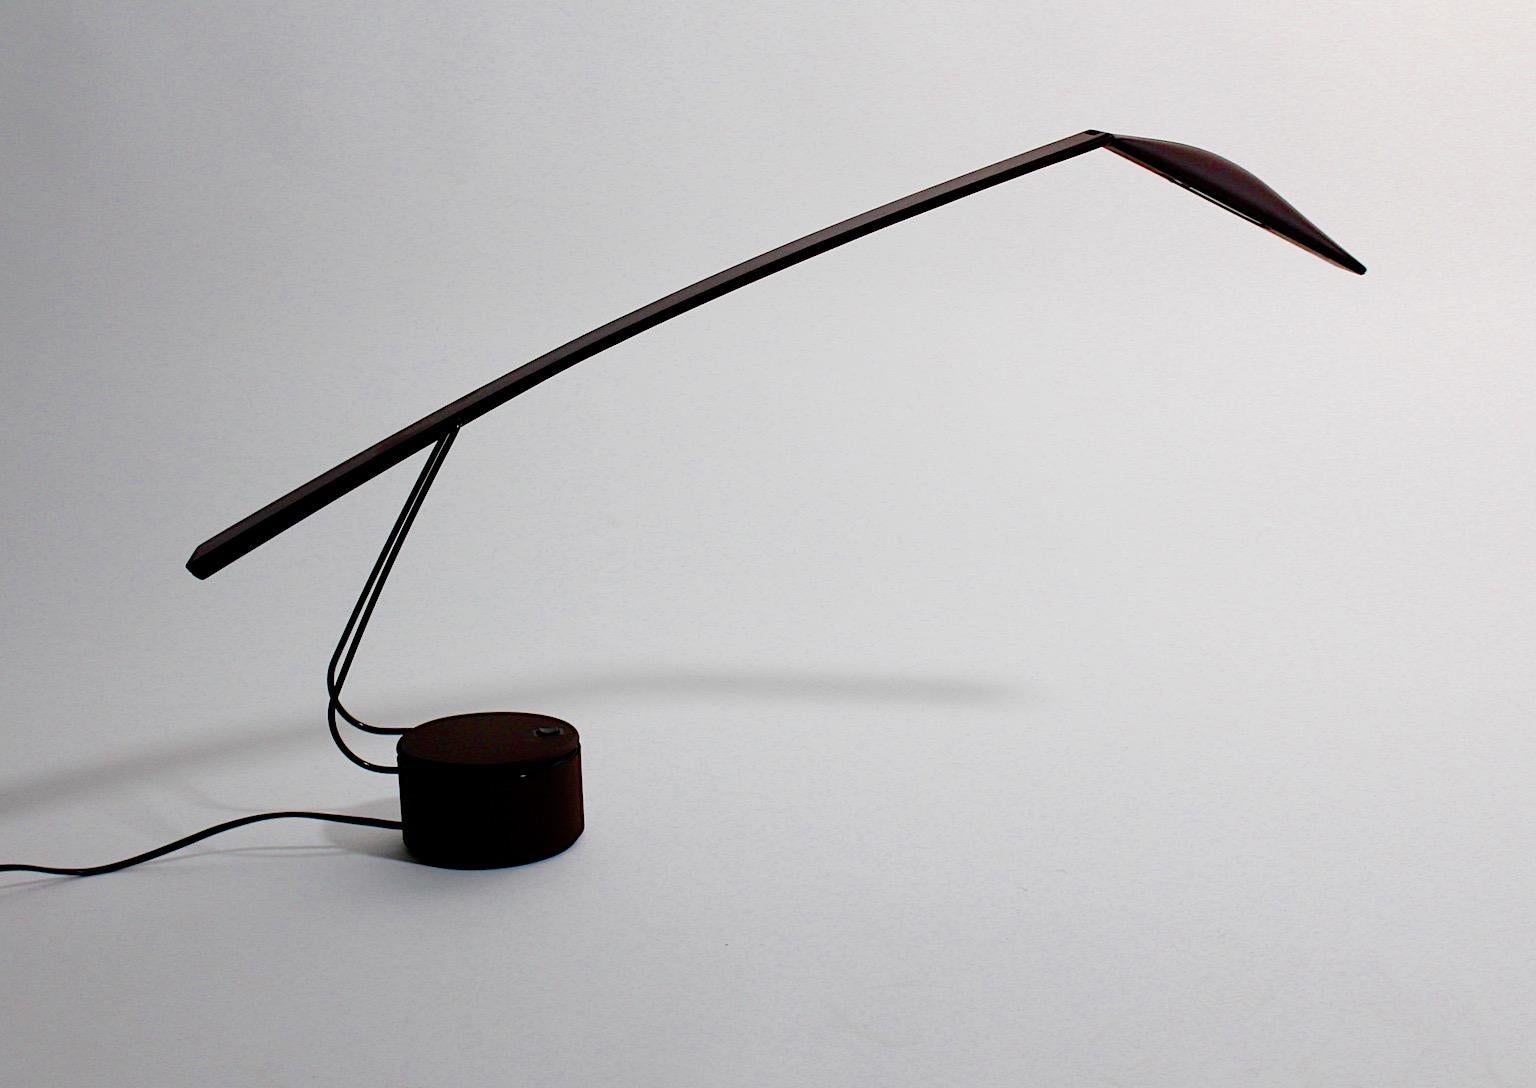 Modern Mario Barbaglia Marco Colombo Dove Vintage Table Lamp for Paf Studio 1980s Italy For Sale